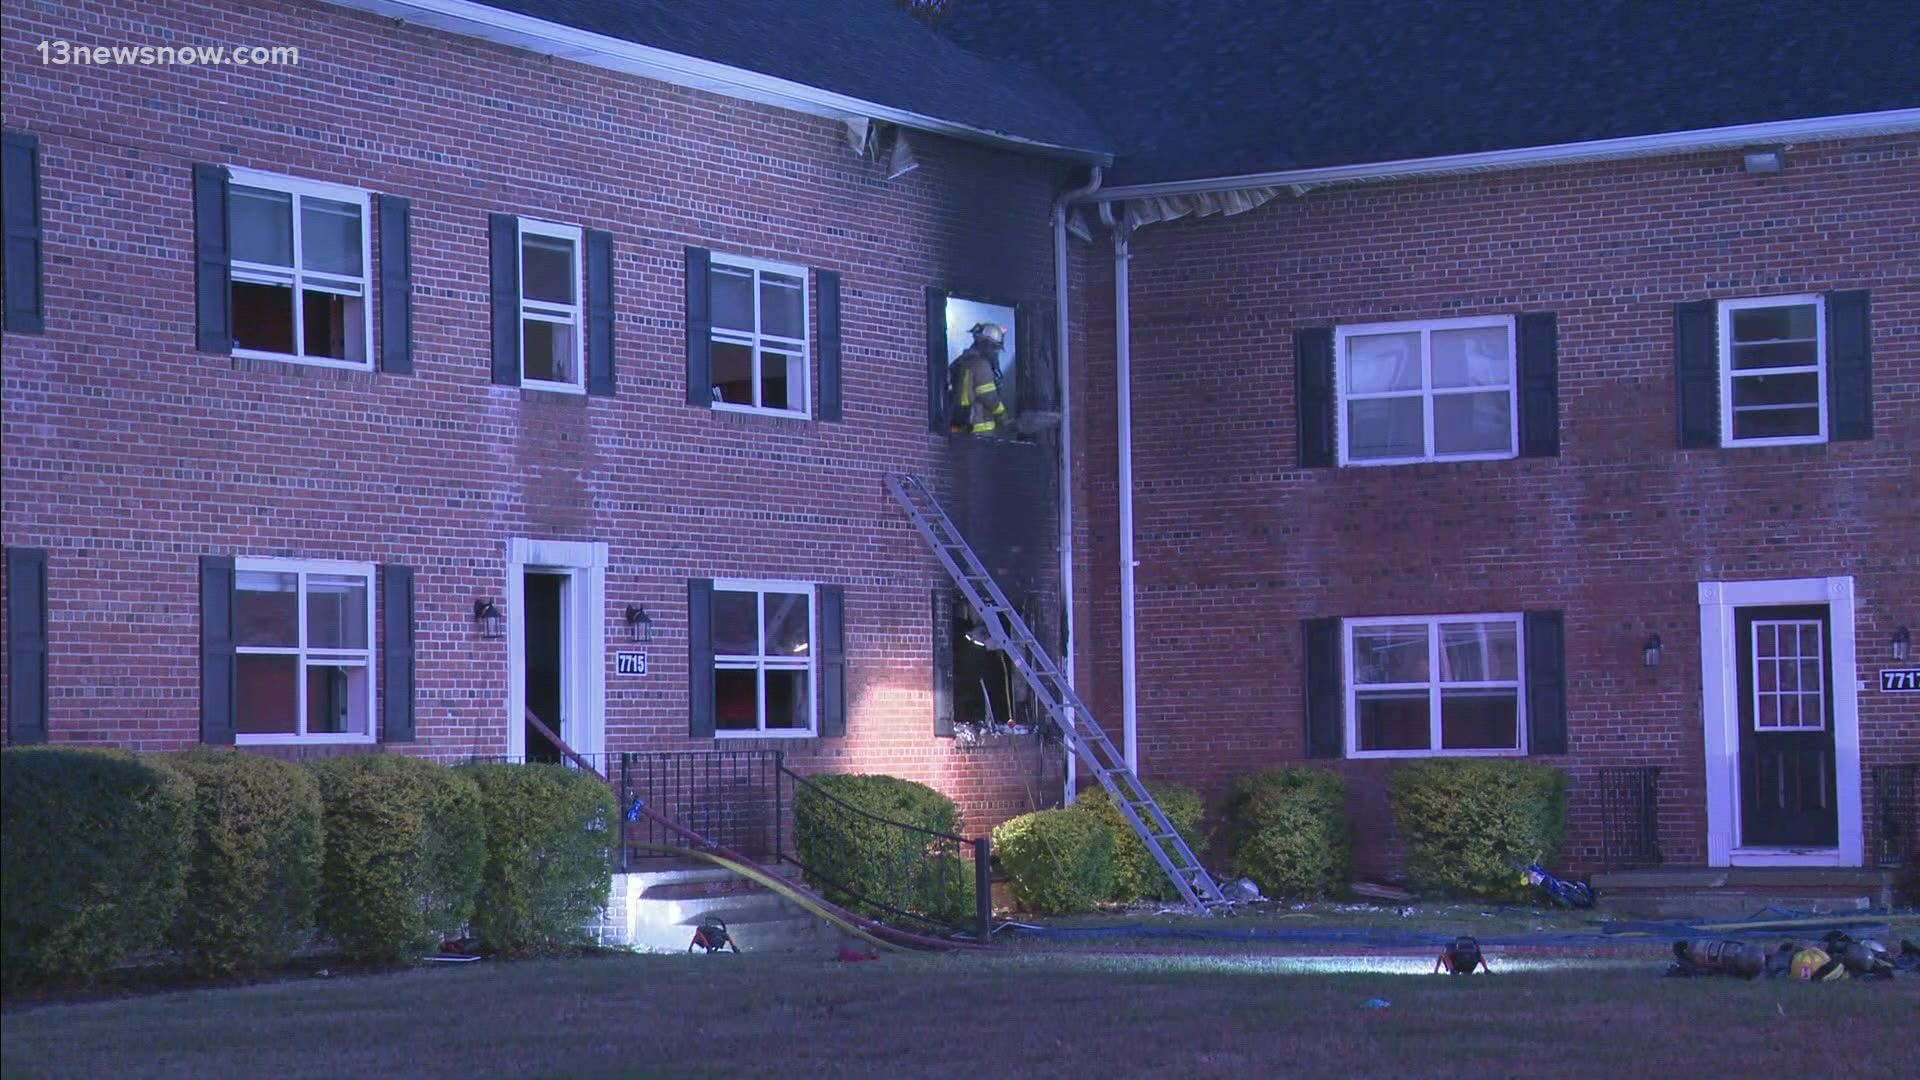 Norfolk Fire-Rescue responded to an apartment fire that occurred on 7715 Restmere Road. Seven residents were displaced from there.